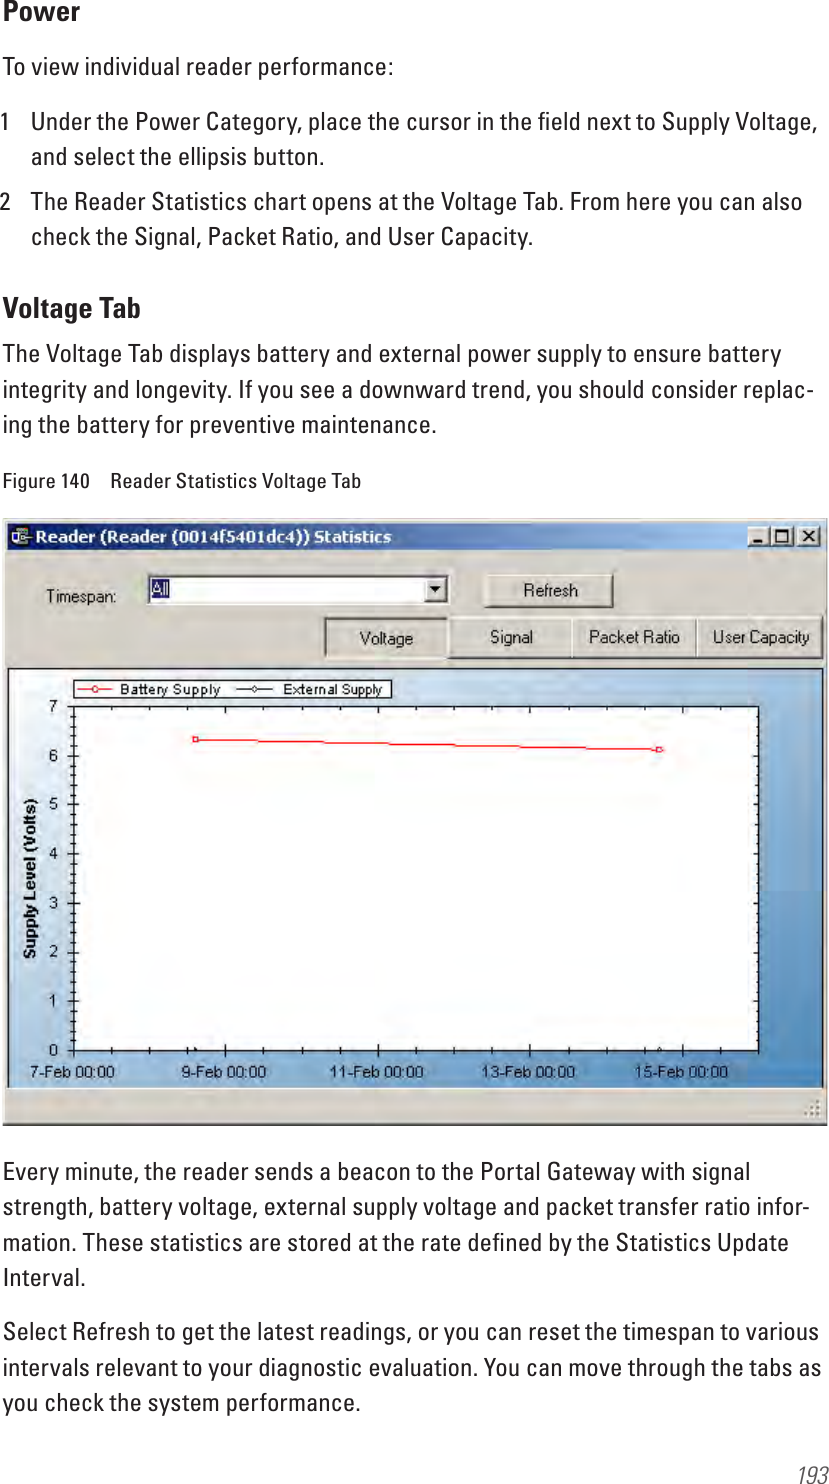 193PowerTo view individual reader performance:1  Under the Power Category, place the cursor in the ﬁeld next to Supply Voltage, and select the ellipsis button. 2  The Reader Statistics chart opens at the Voltage Tab. From here you can also check the Signal, Packet Ratio, and User Capacity.Voltage TabThe Voltage Tab displays battery and external power supply to ensure battery integrity and longevity. If you see a downward trend, you should consider replac-ing the battery for preventive maintenance.Figure 140  Reader Statistics Voltage TabEvery minute, the reader sends a beacon to the Portal Gateway with signal strength, battery voltage, external supply voltage and packet transfer ratio infor-mation. These statistics are stored at the rate deﬁned by the Statistics Update Interval.Select Refresh to get the latest readings, or you can reset the timespan to various intervals relevant to your diagnostic evaluation. You can move through the tabs as you check the system performance.